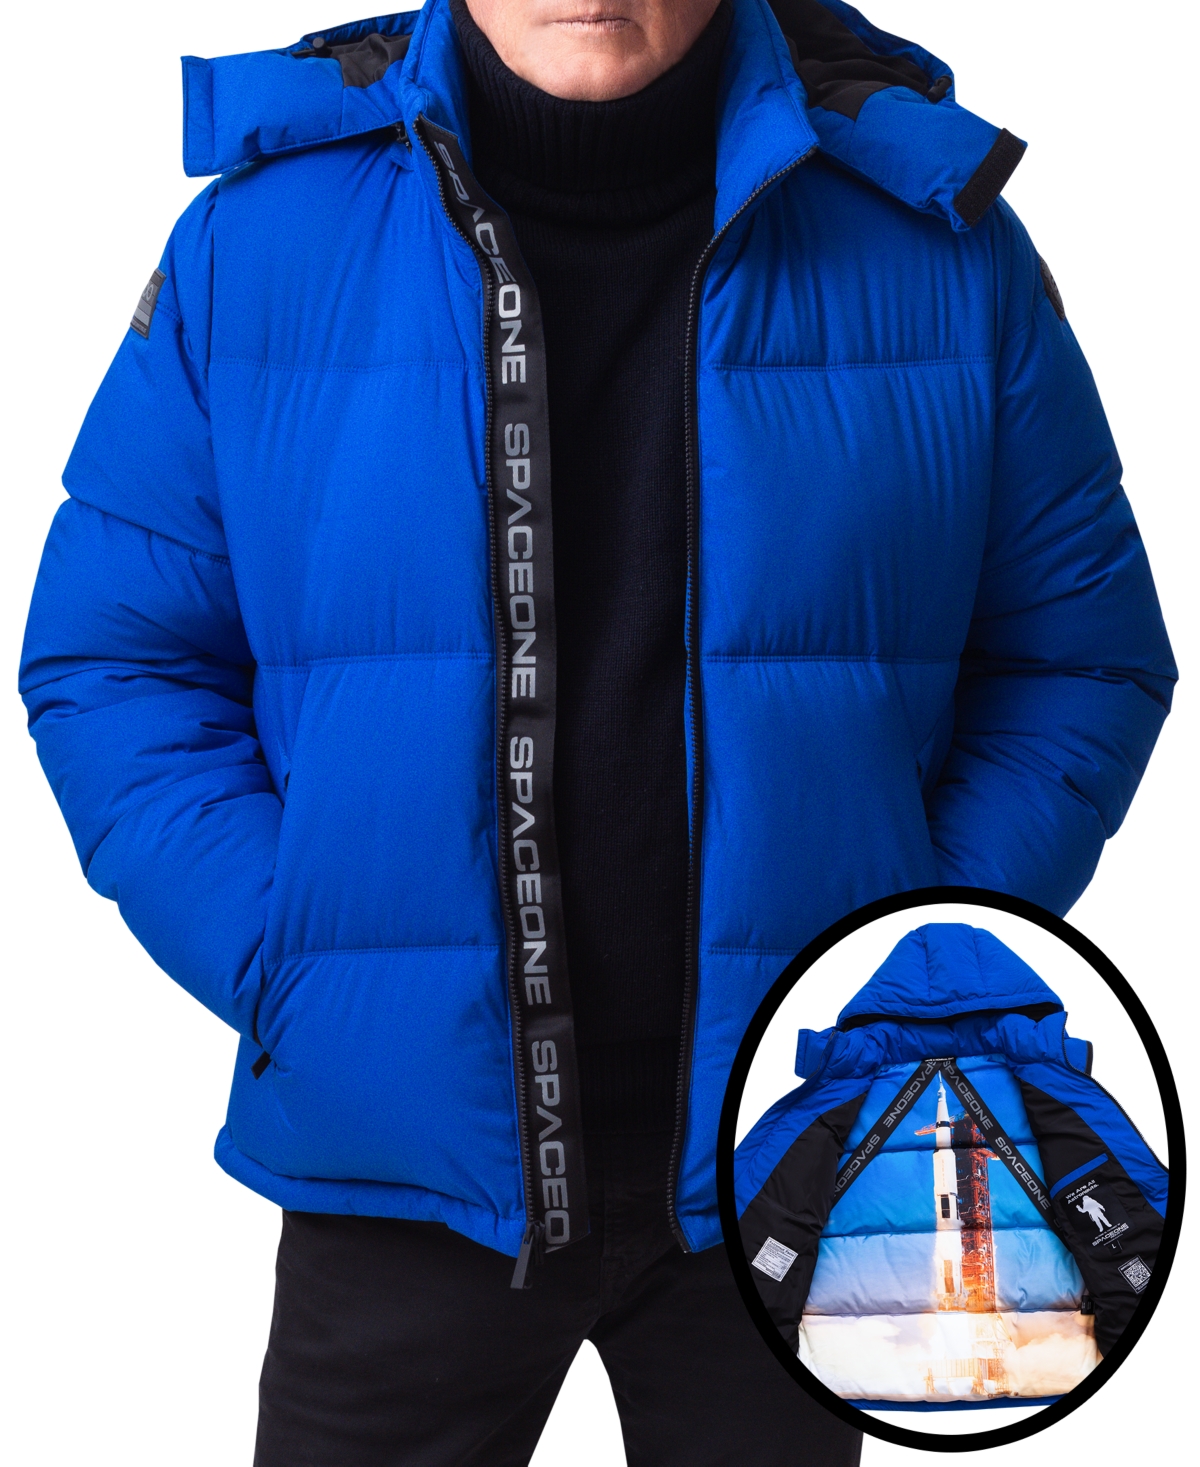 Men's Nasa Inspired Hooded Puffer Jacket with Printed Astronaut Interior - Gray